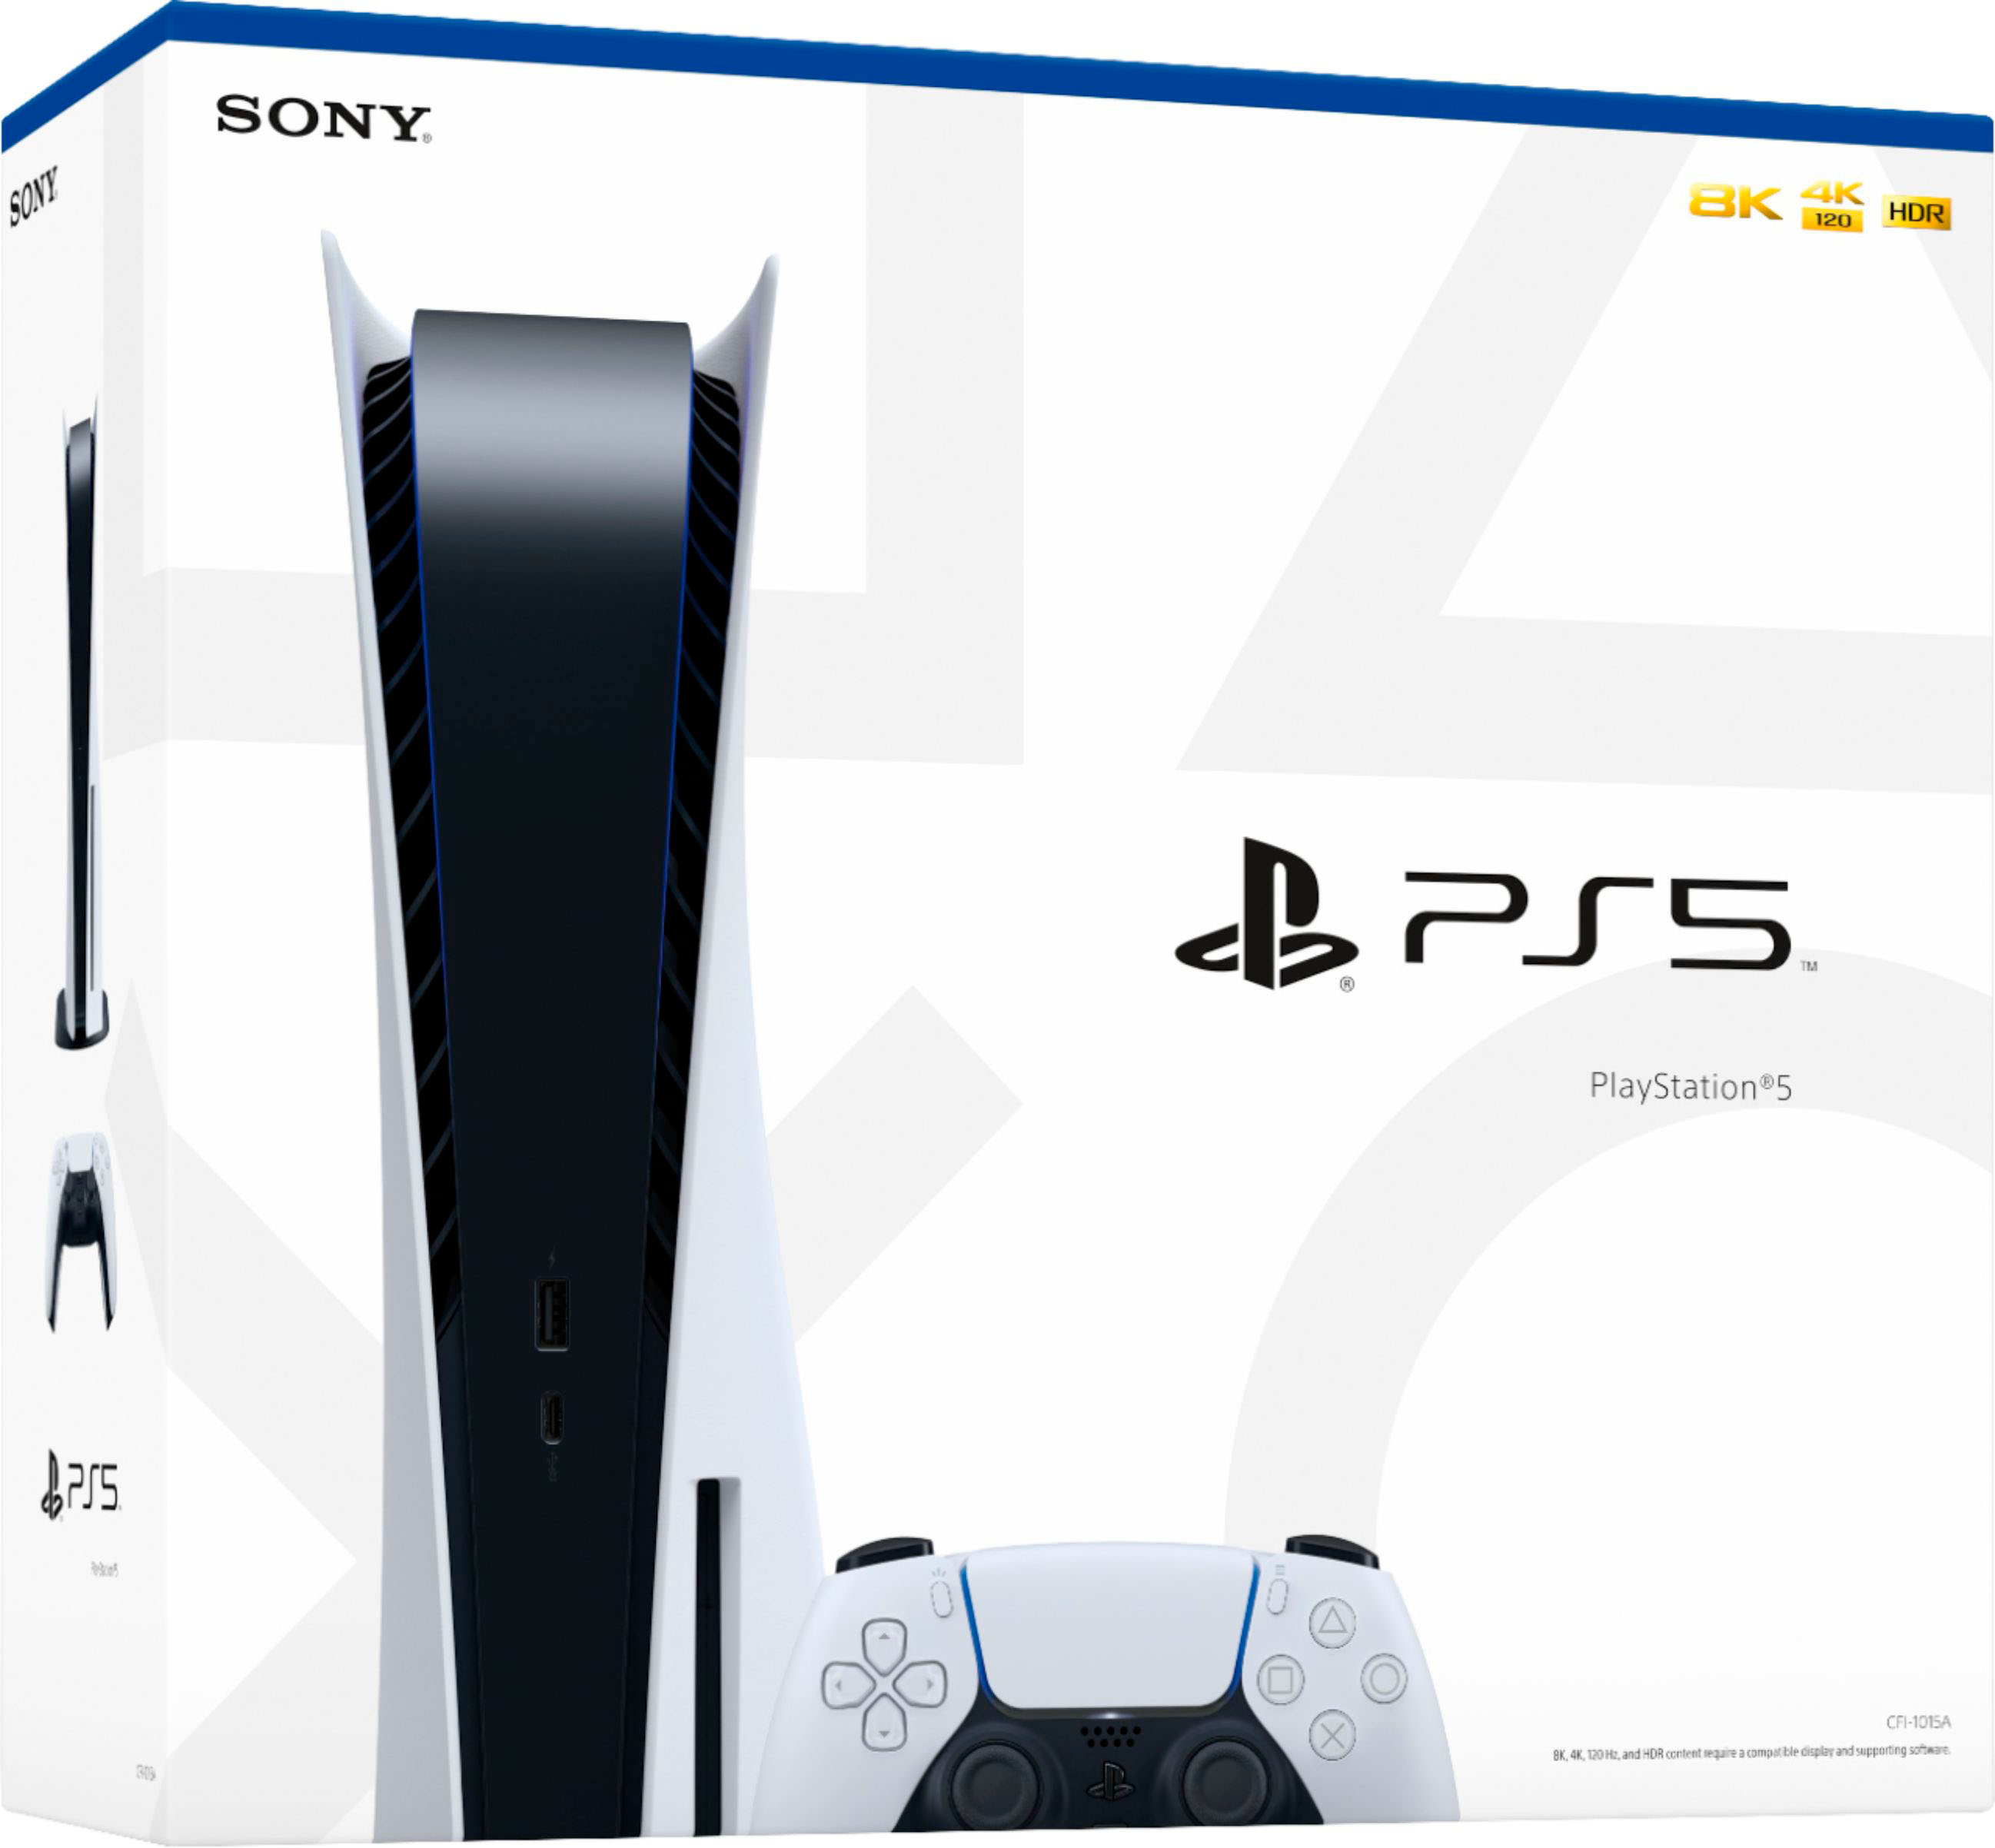 google how much is the playstation 5